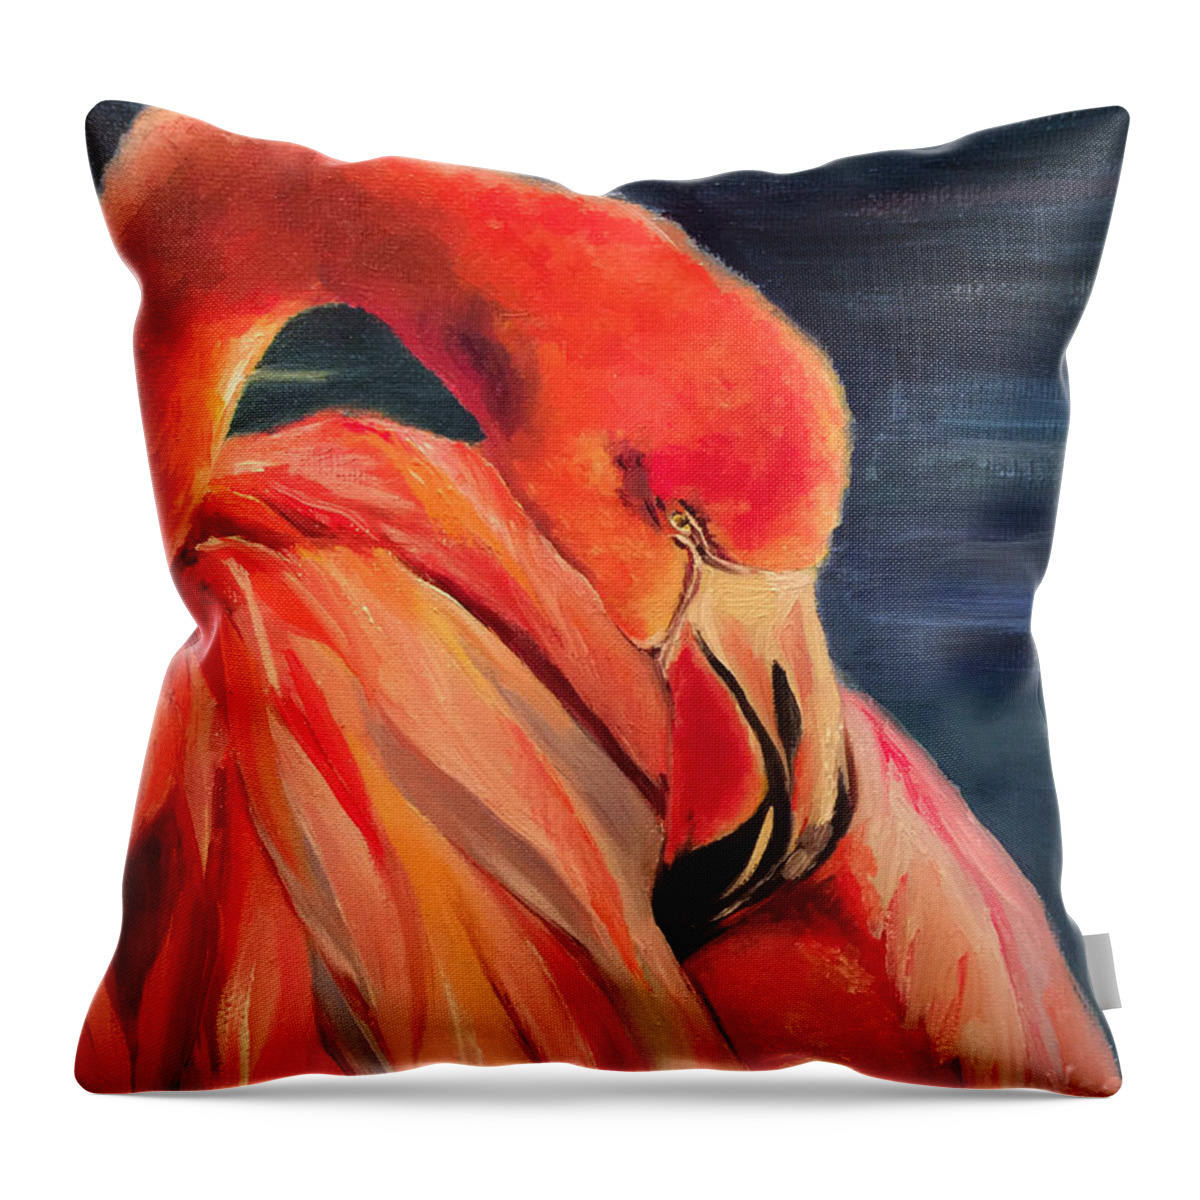 Flamingo Throw Pillow featuring the painting Pink Sunset by Ksenia VanderHoff